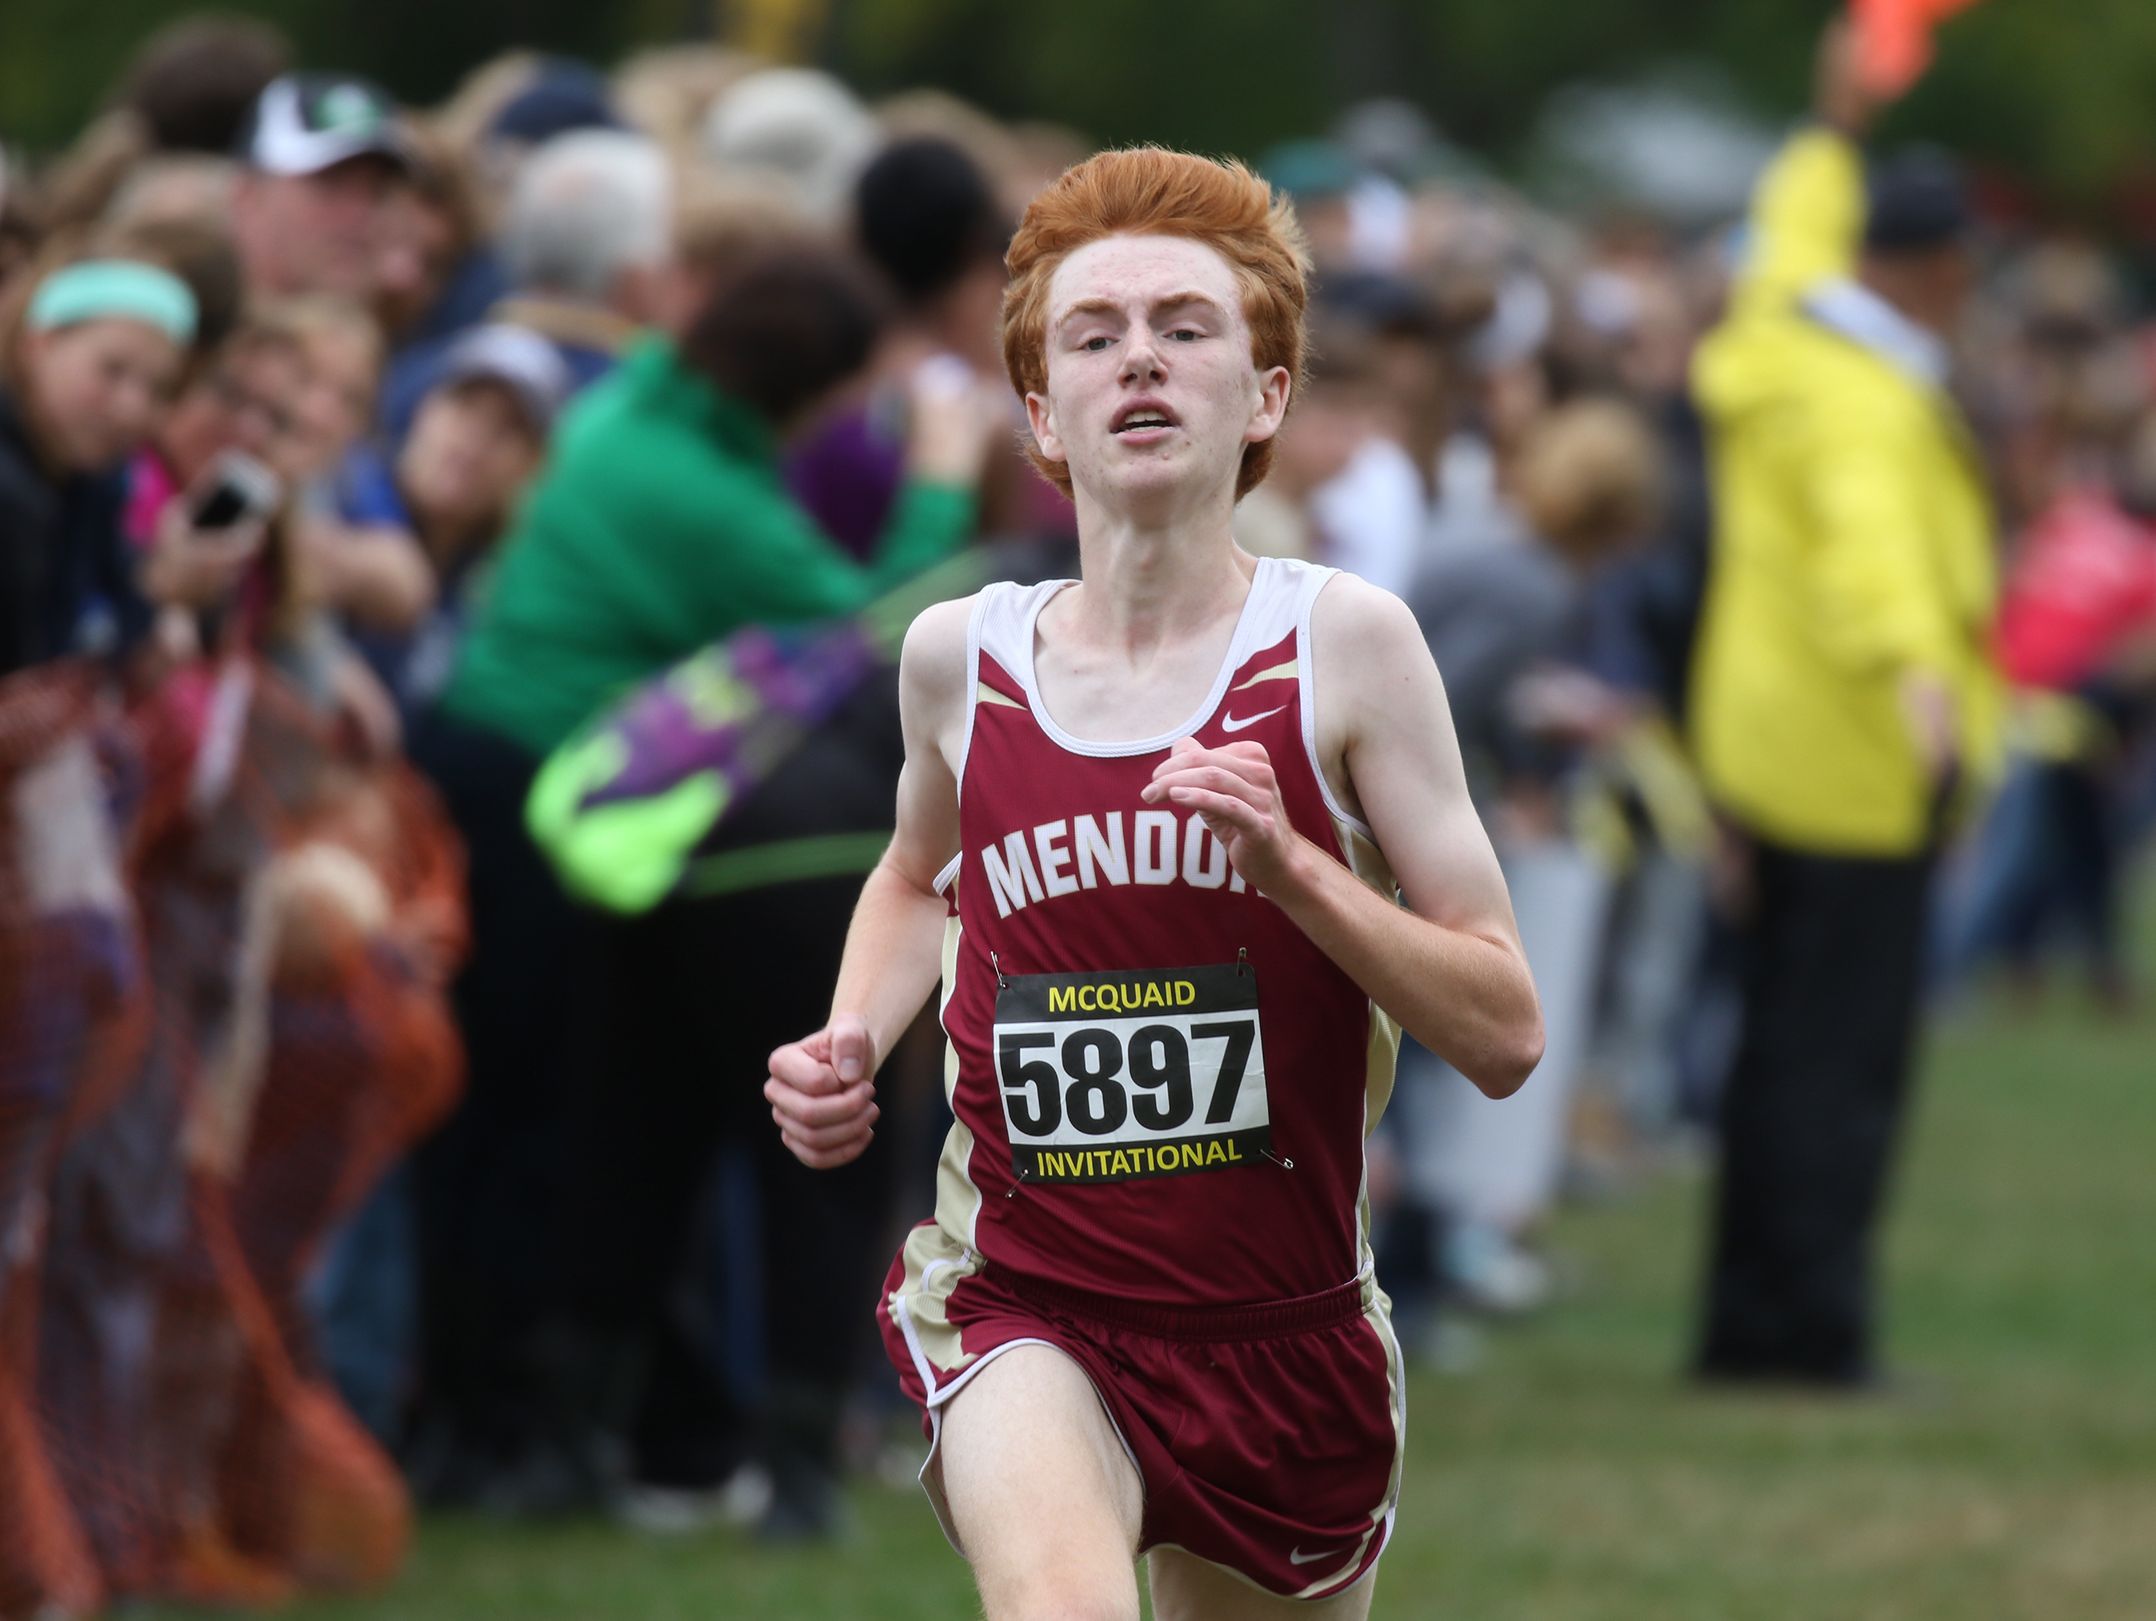 Nathan Lawler of Pittsford Mendon takes second in the Boys Seeded Varsity AA medium schools division.